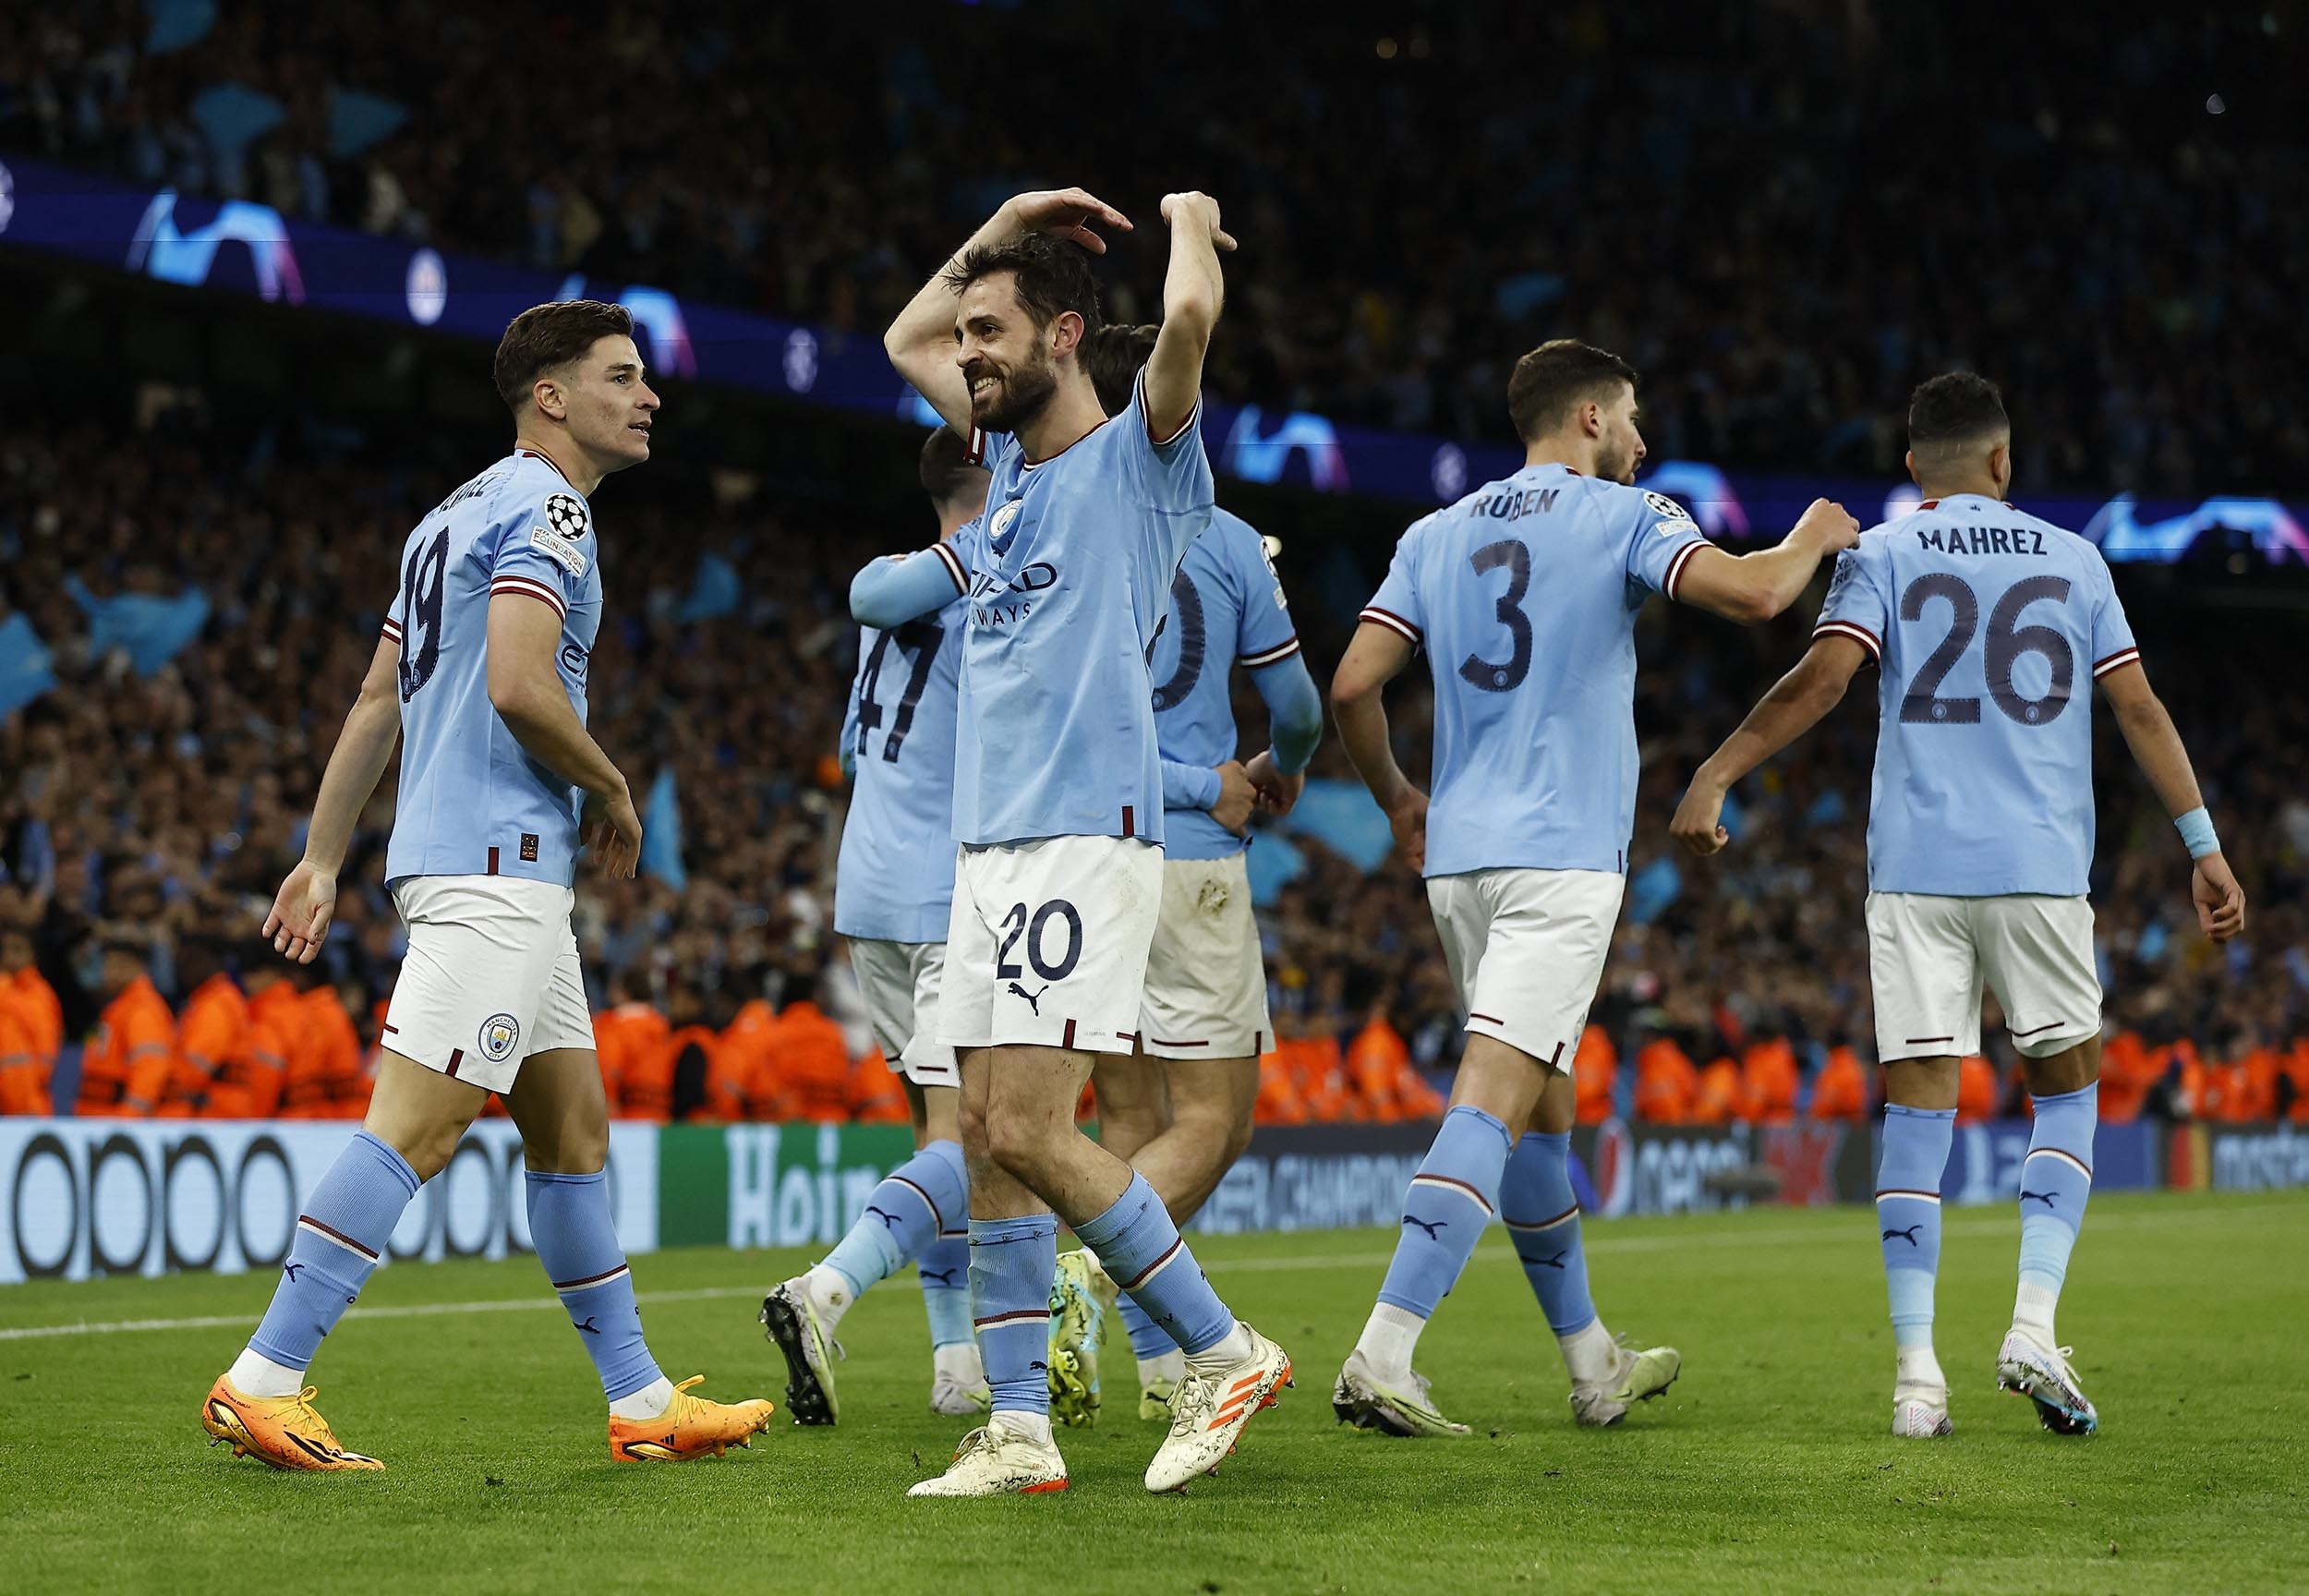 Man City beats Real Madrid 40 to advance to Champions League final